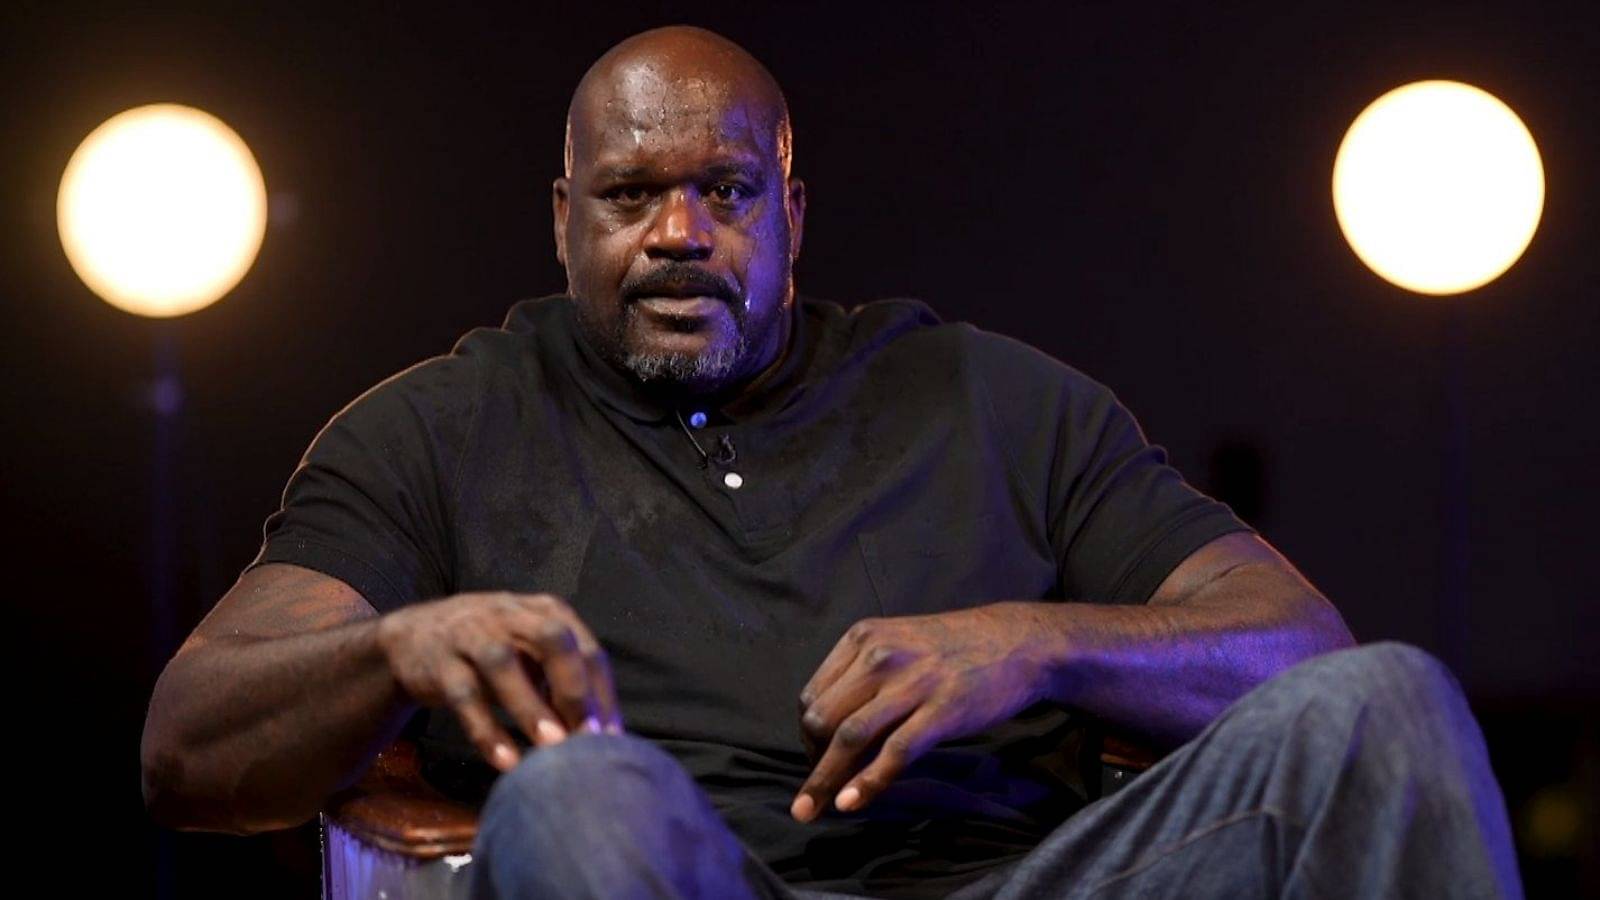 "If we call every foul on you Shaquille O'Neal, the game will last 4 hours!": When NBA commissioner David Stern had to placate an irate Shaq and make him understand what he needed to change